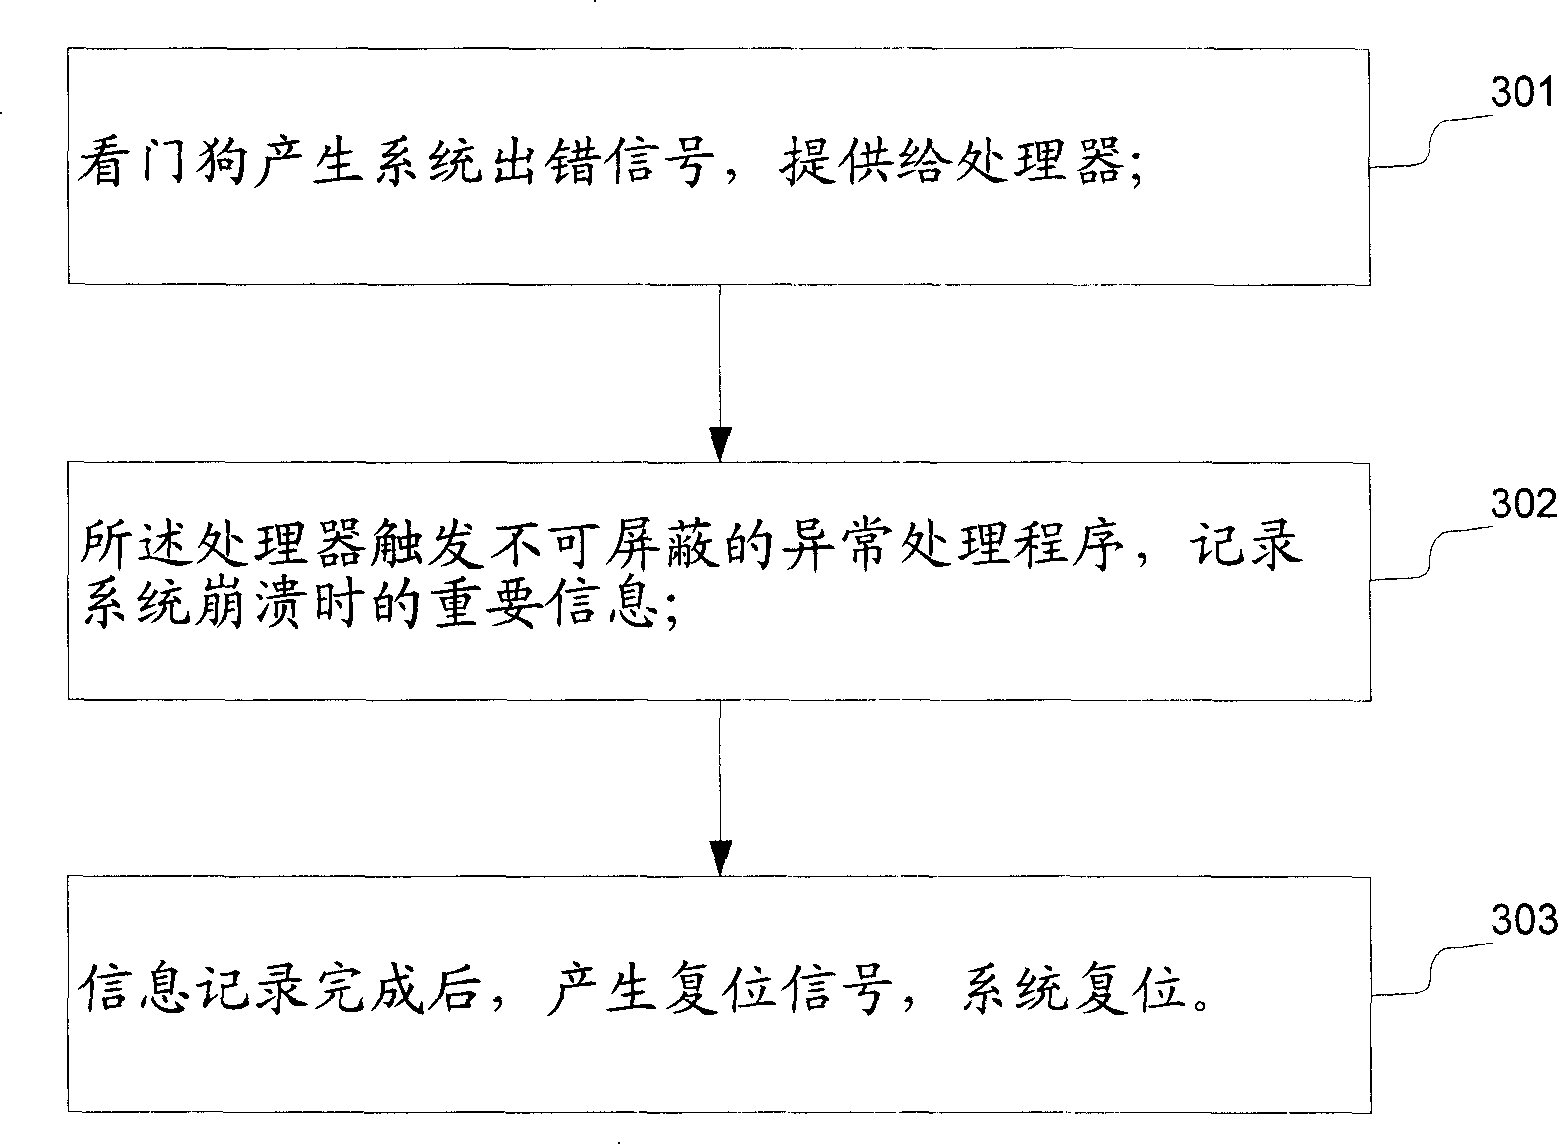 Method and system for storing important information before system collapse